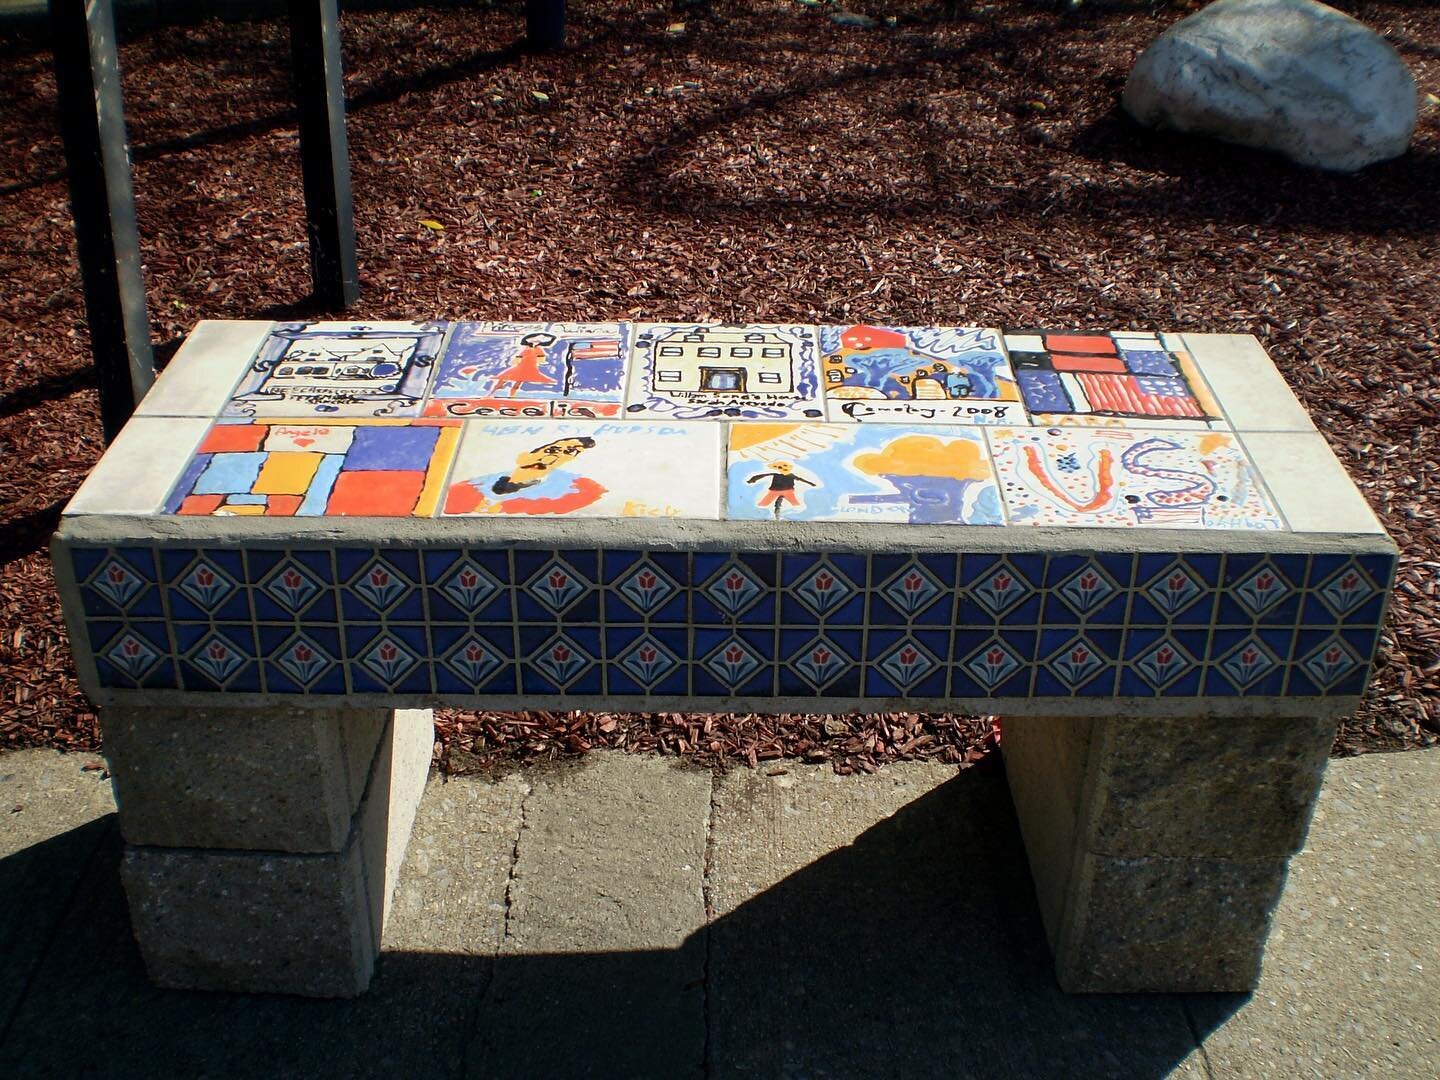 We just updated our Sculpture Walk page to include information on the tiled benches seen around #Peekskill - map in our profile link